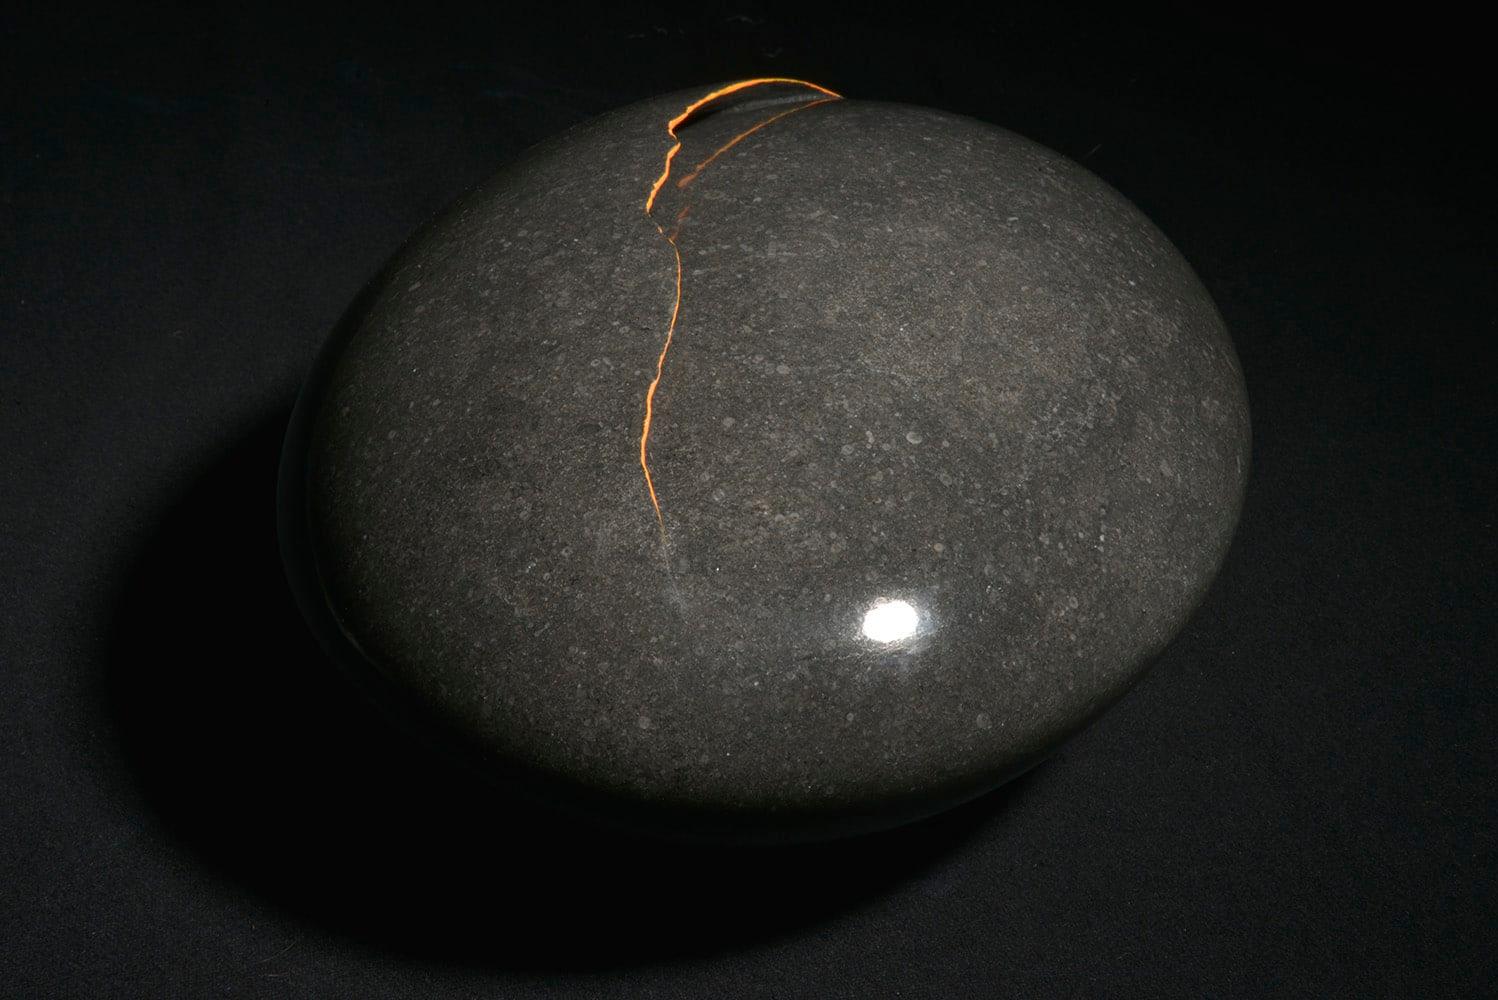 Under the skin is a unique petit granit and glaze sculpture by contemporary artist Francesca Bernardini, dimensions are 16 × 30 × 24 cm (6.3 × 11.8 × 9.4 in). 
The sculpture is signed and comes with a certificate of authenticity.

The artist's debut